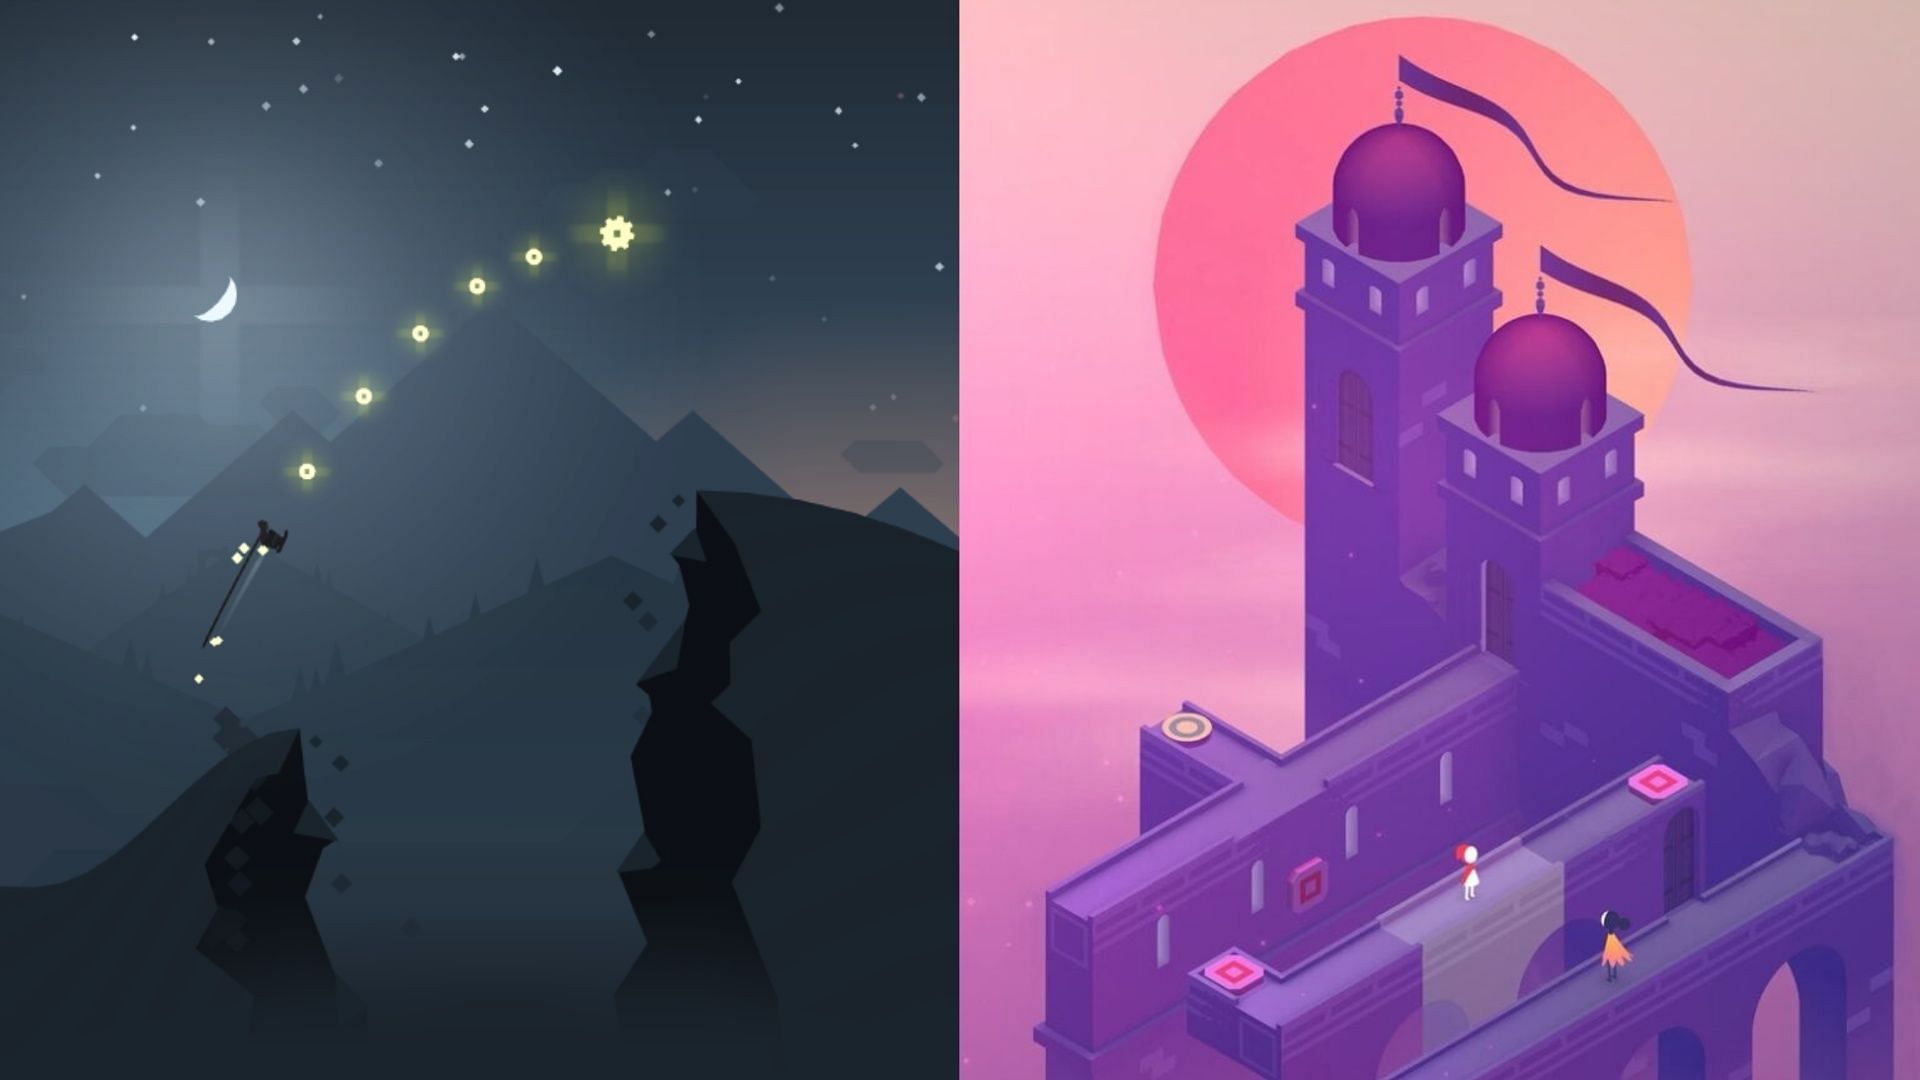 Casual games tend to be more relaxing rather than challenging experiences (Images via Ustwo and Snowman) 